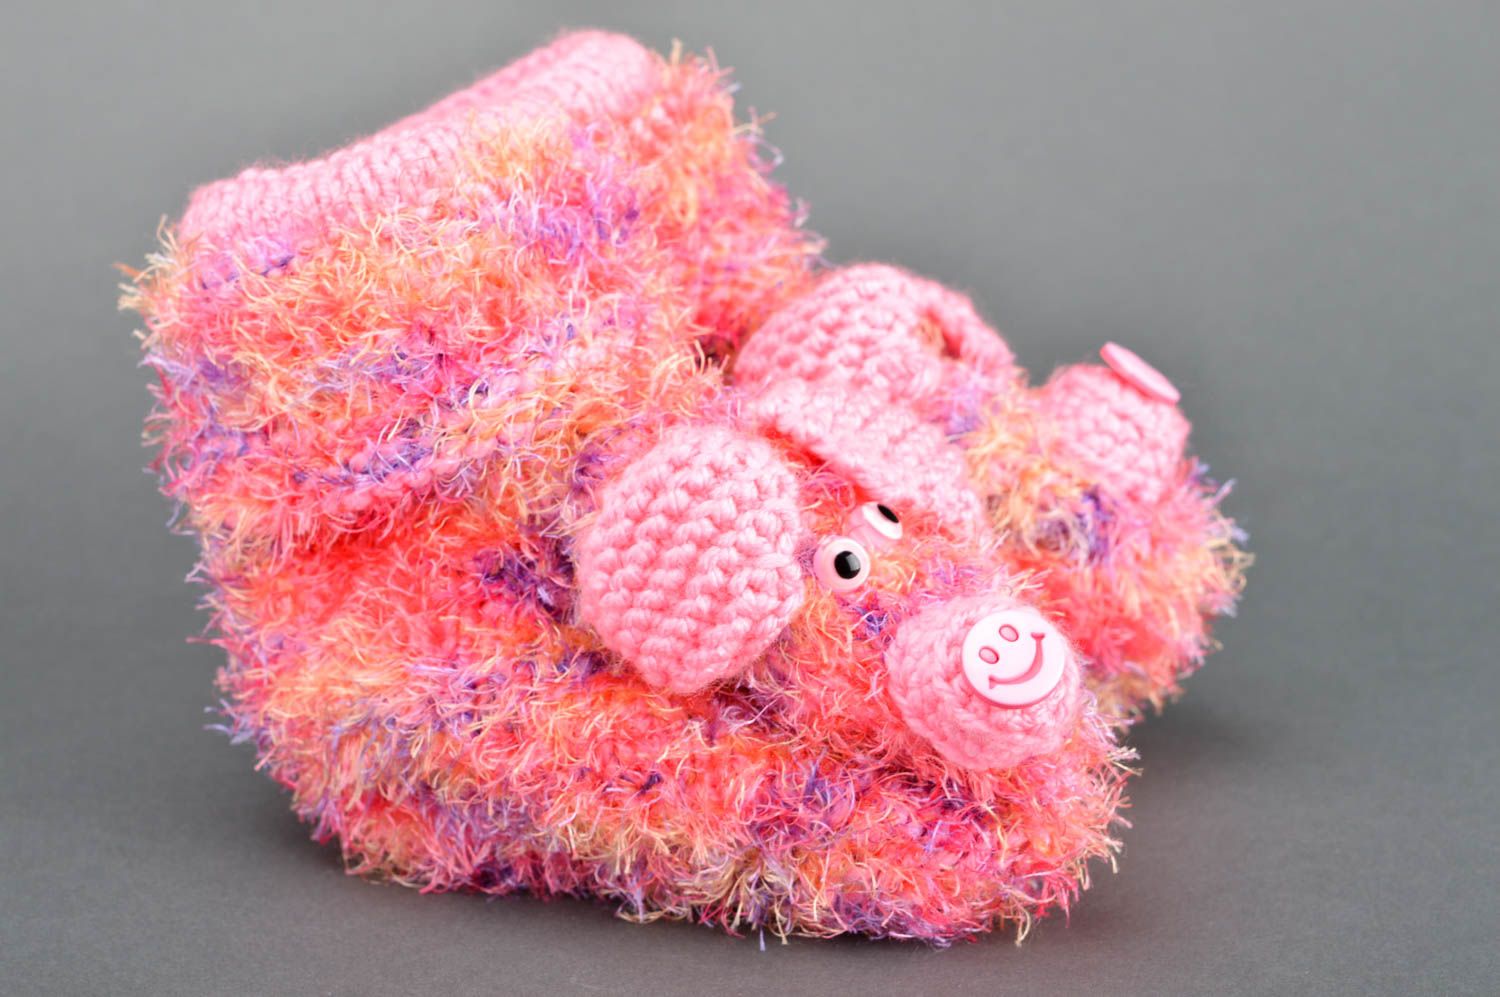 Beautiful handmade crochet slippers warm baby slippers house shoes gift ideas photo 2